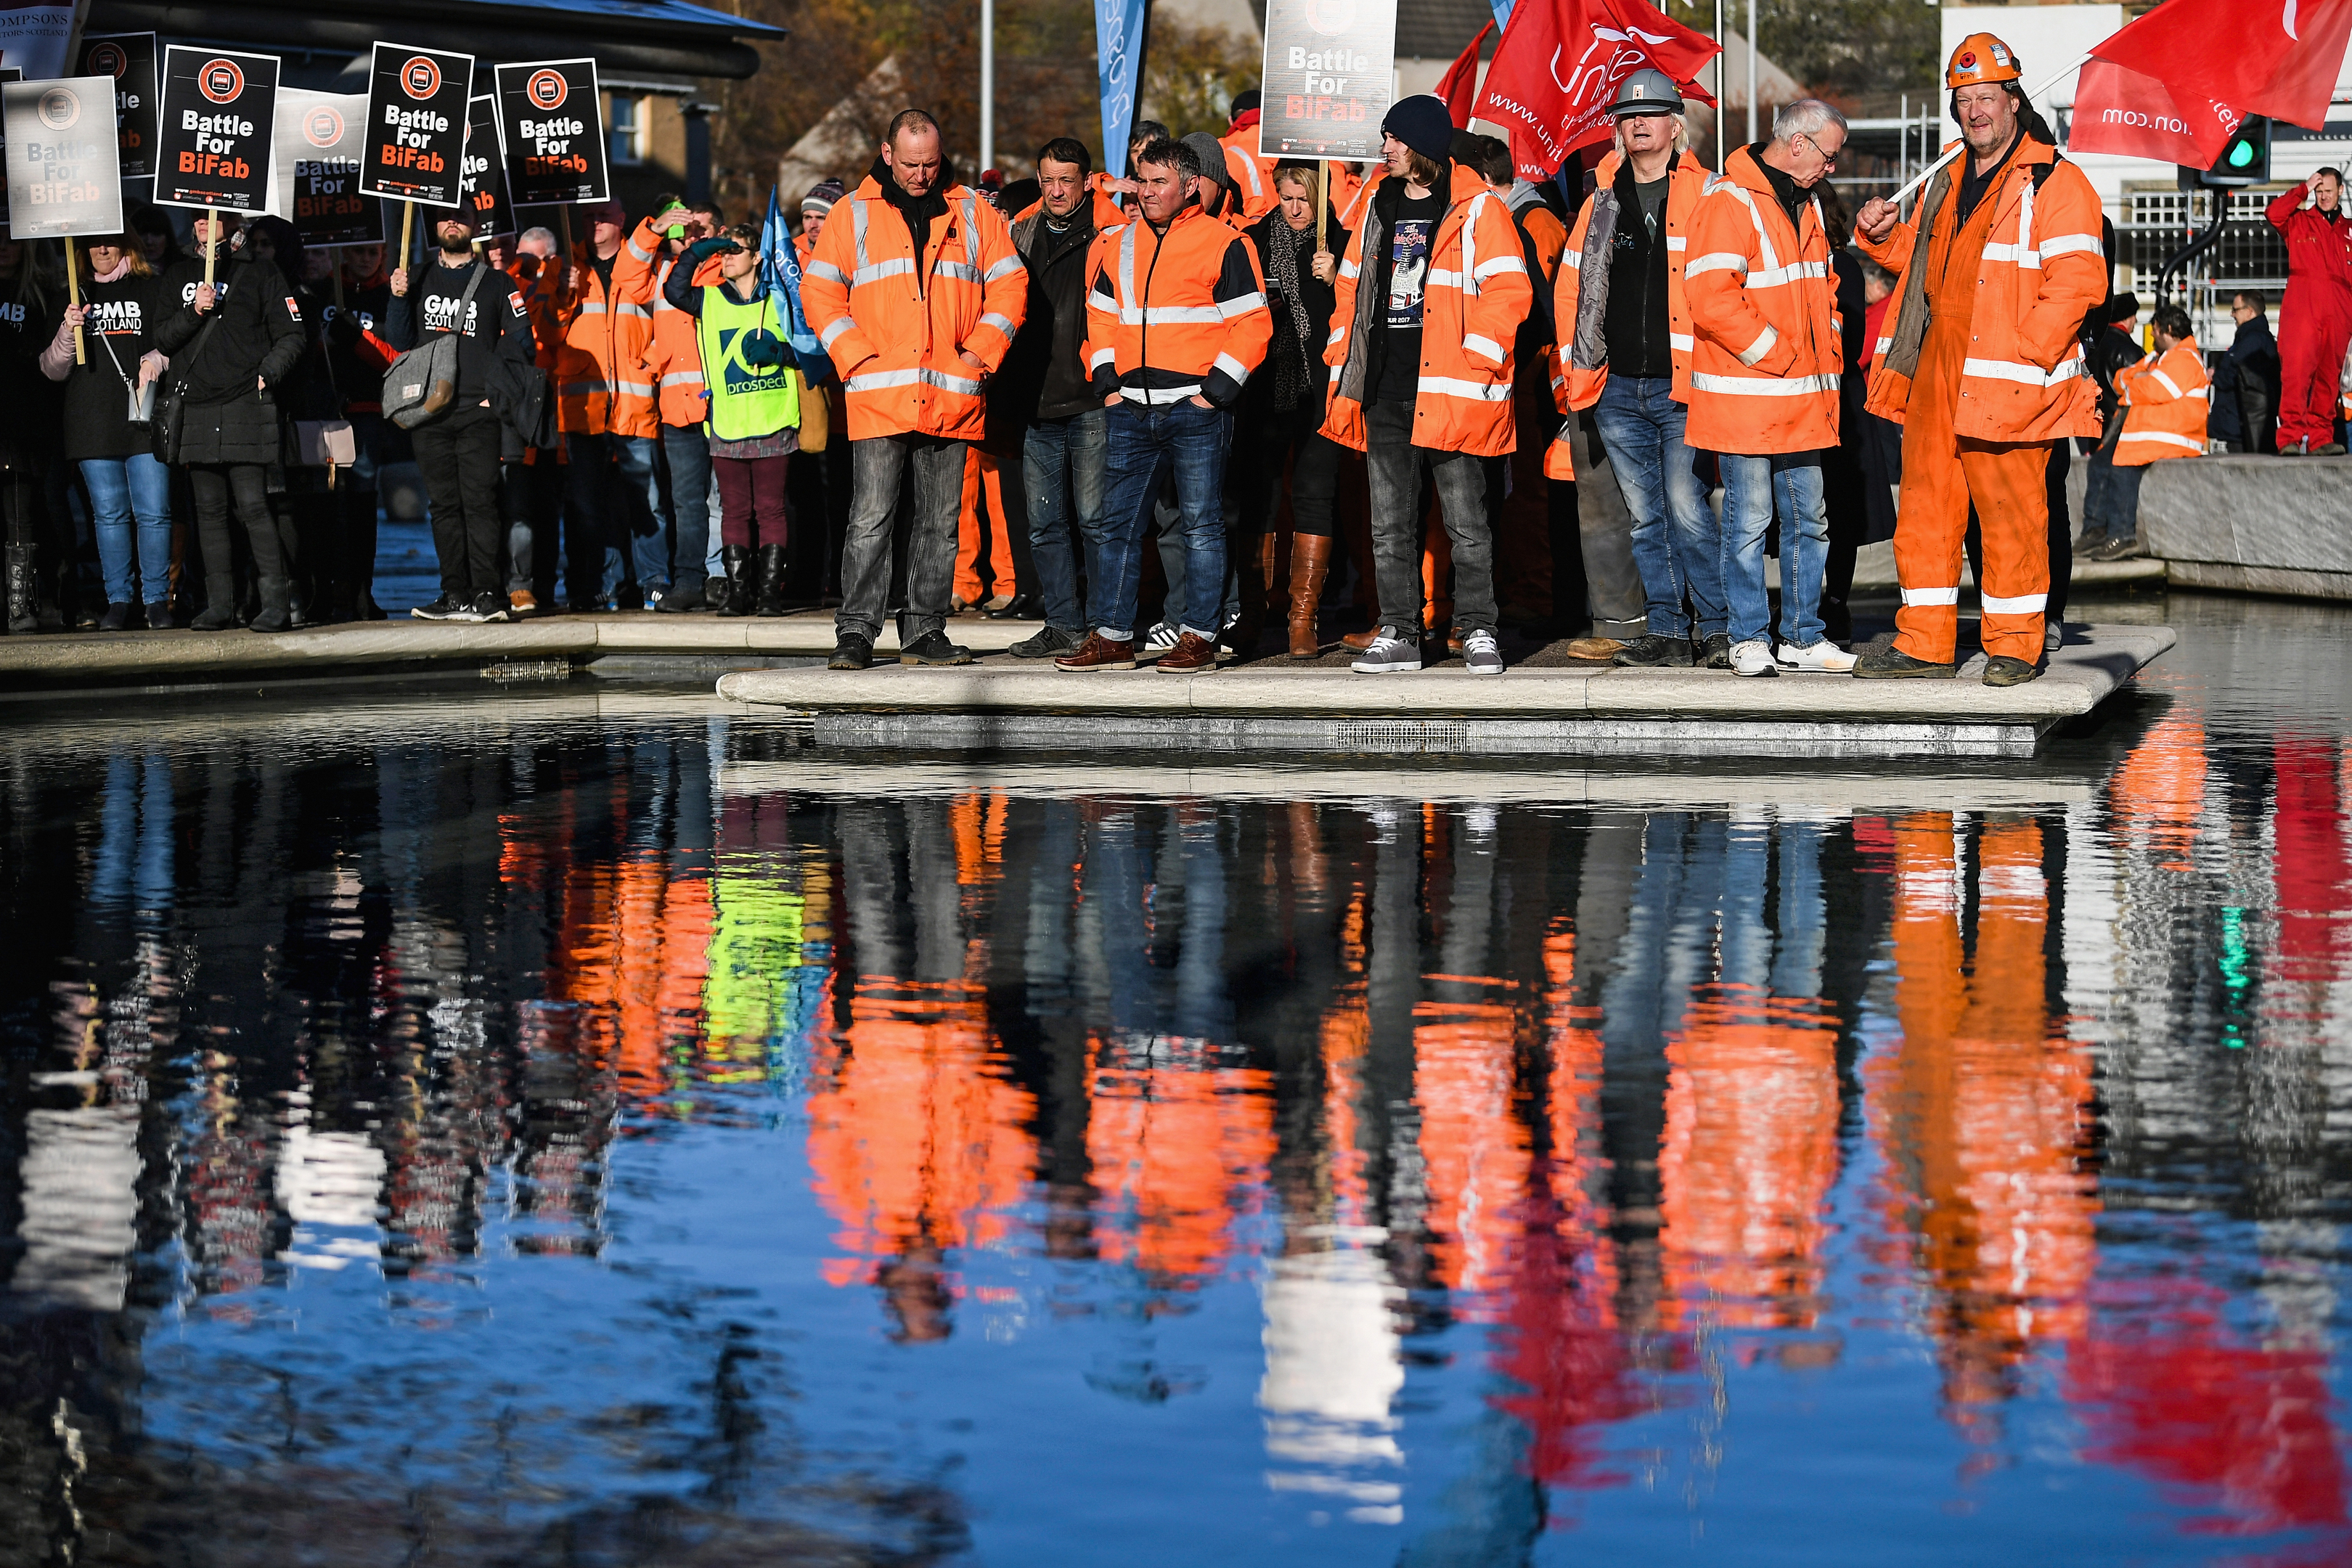 BiFab workers rallied at the Scottish Parliament on November 16.